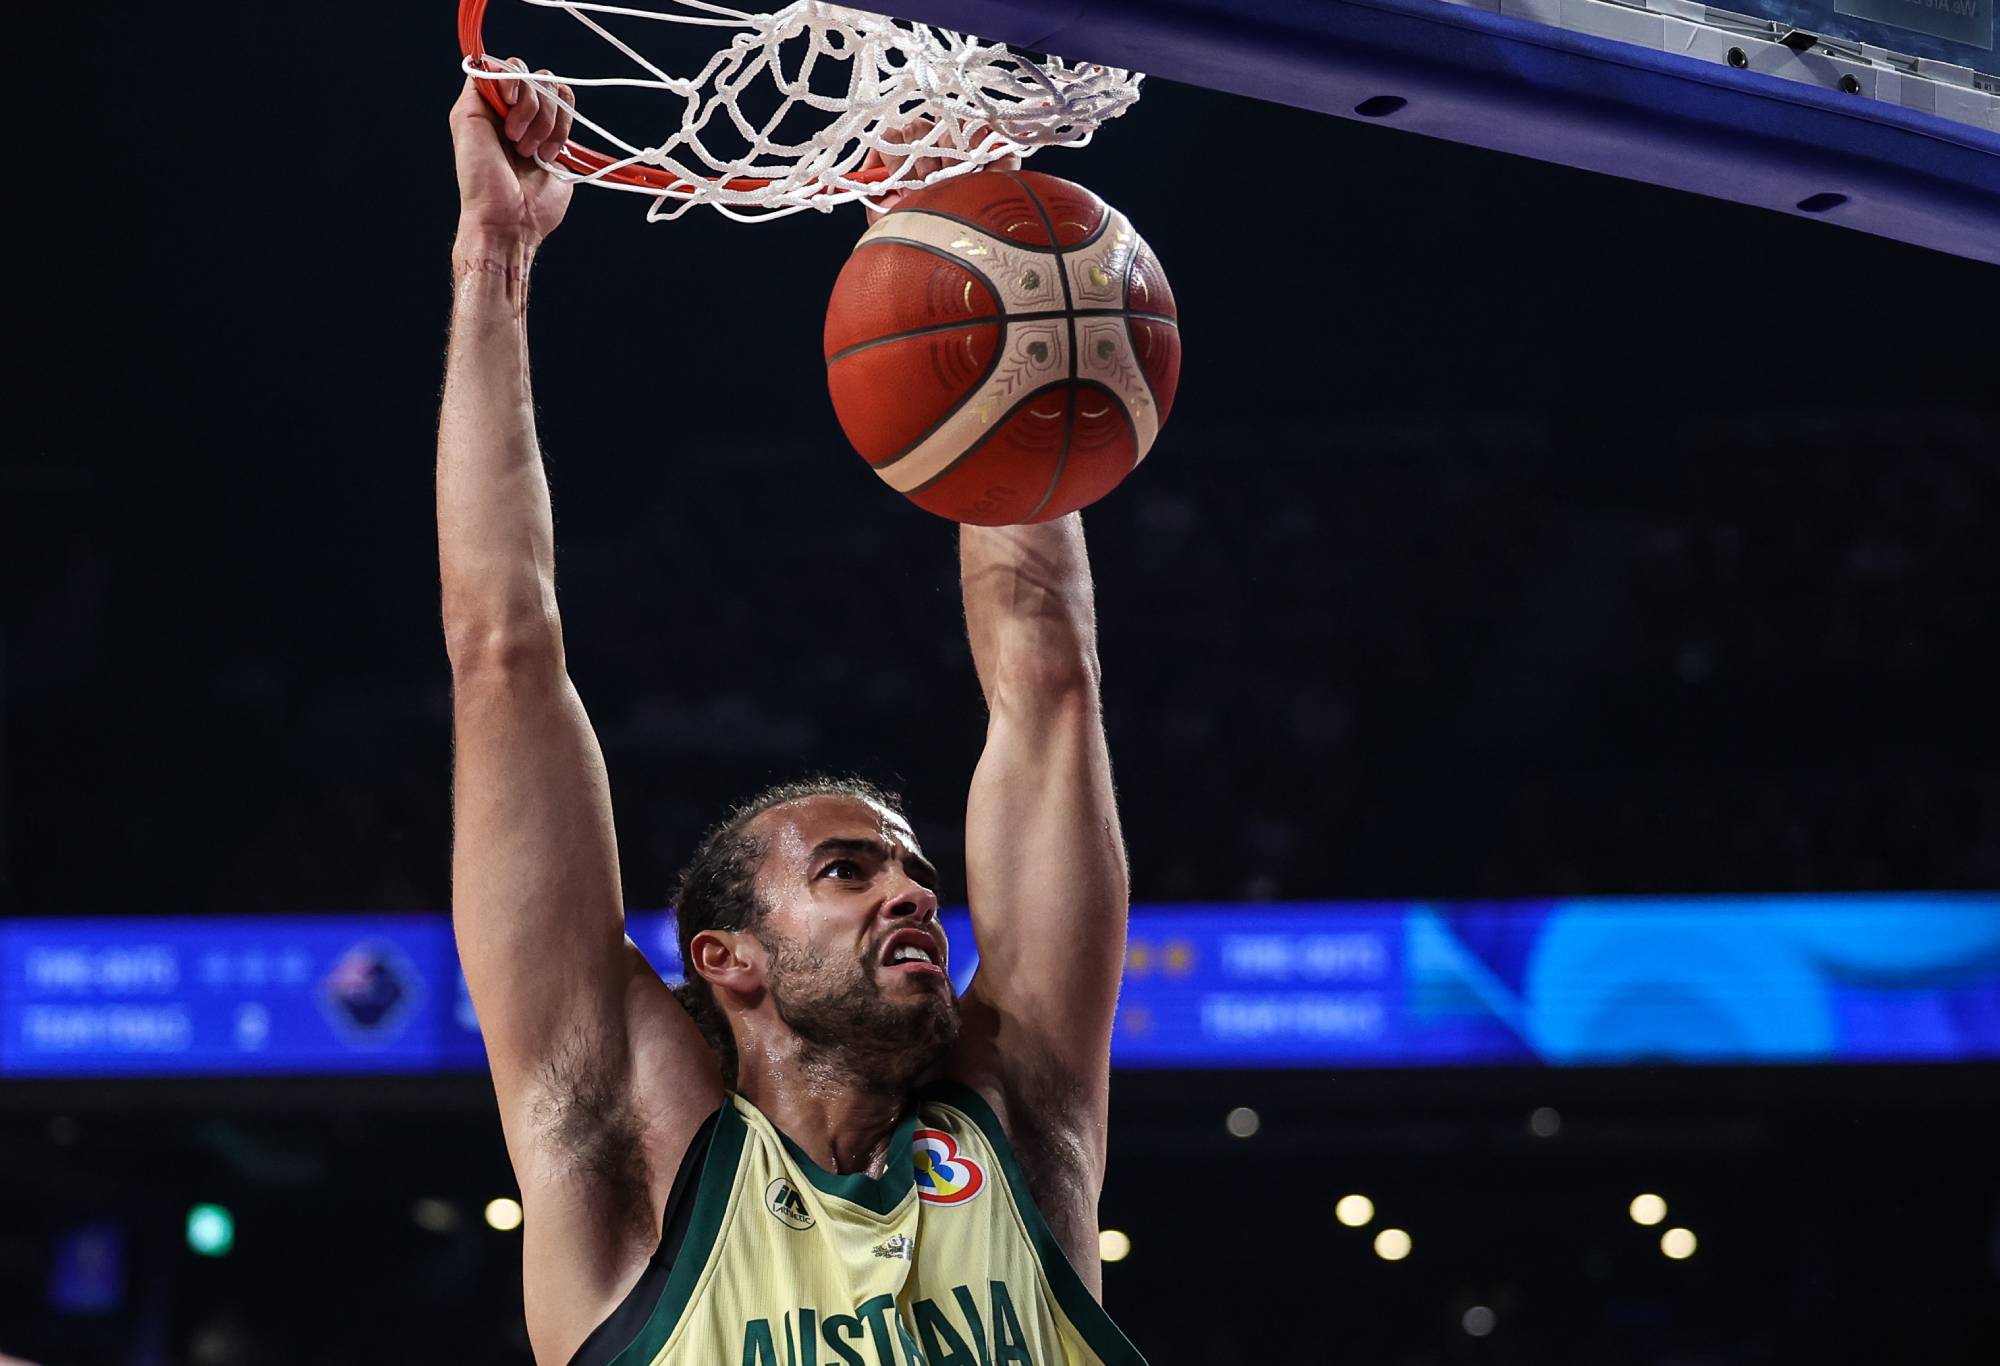 Xavier Cooks #9 of Australia dunks the ball during the FIBA Basketball World Cup Group E game between Australia and Japan at Okinawa Arena on August 29, 2023 in Okinawa, Japan. (Photo by Takashi Aoyama/Getty Images)